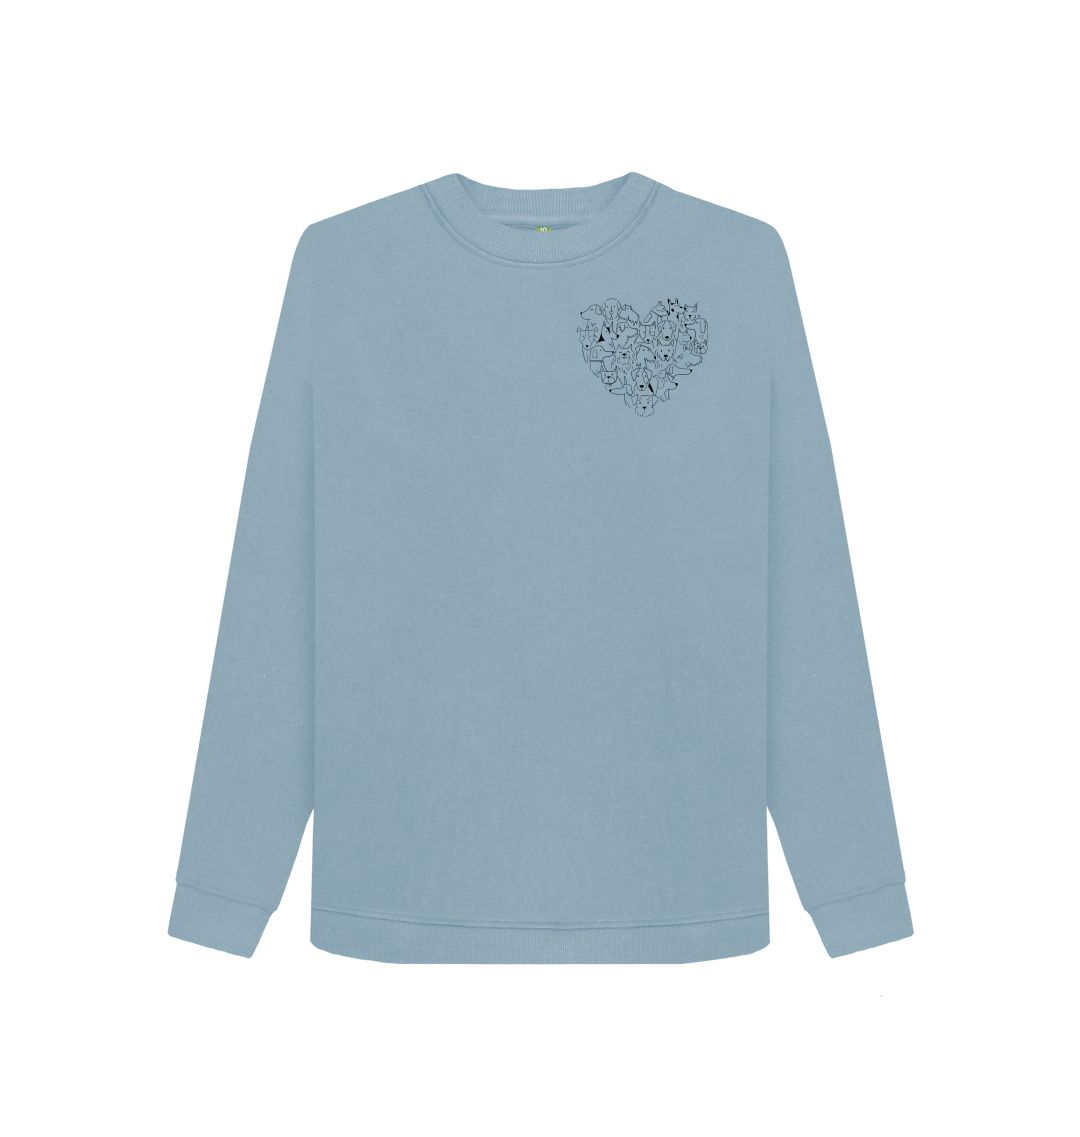 Stone Blue 'For the love of Dogs' Sweatshirt